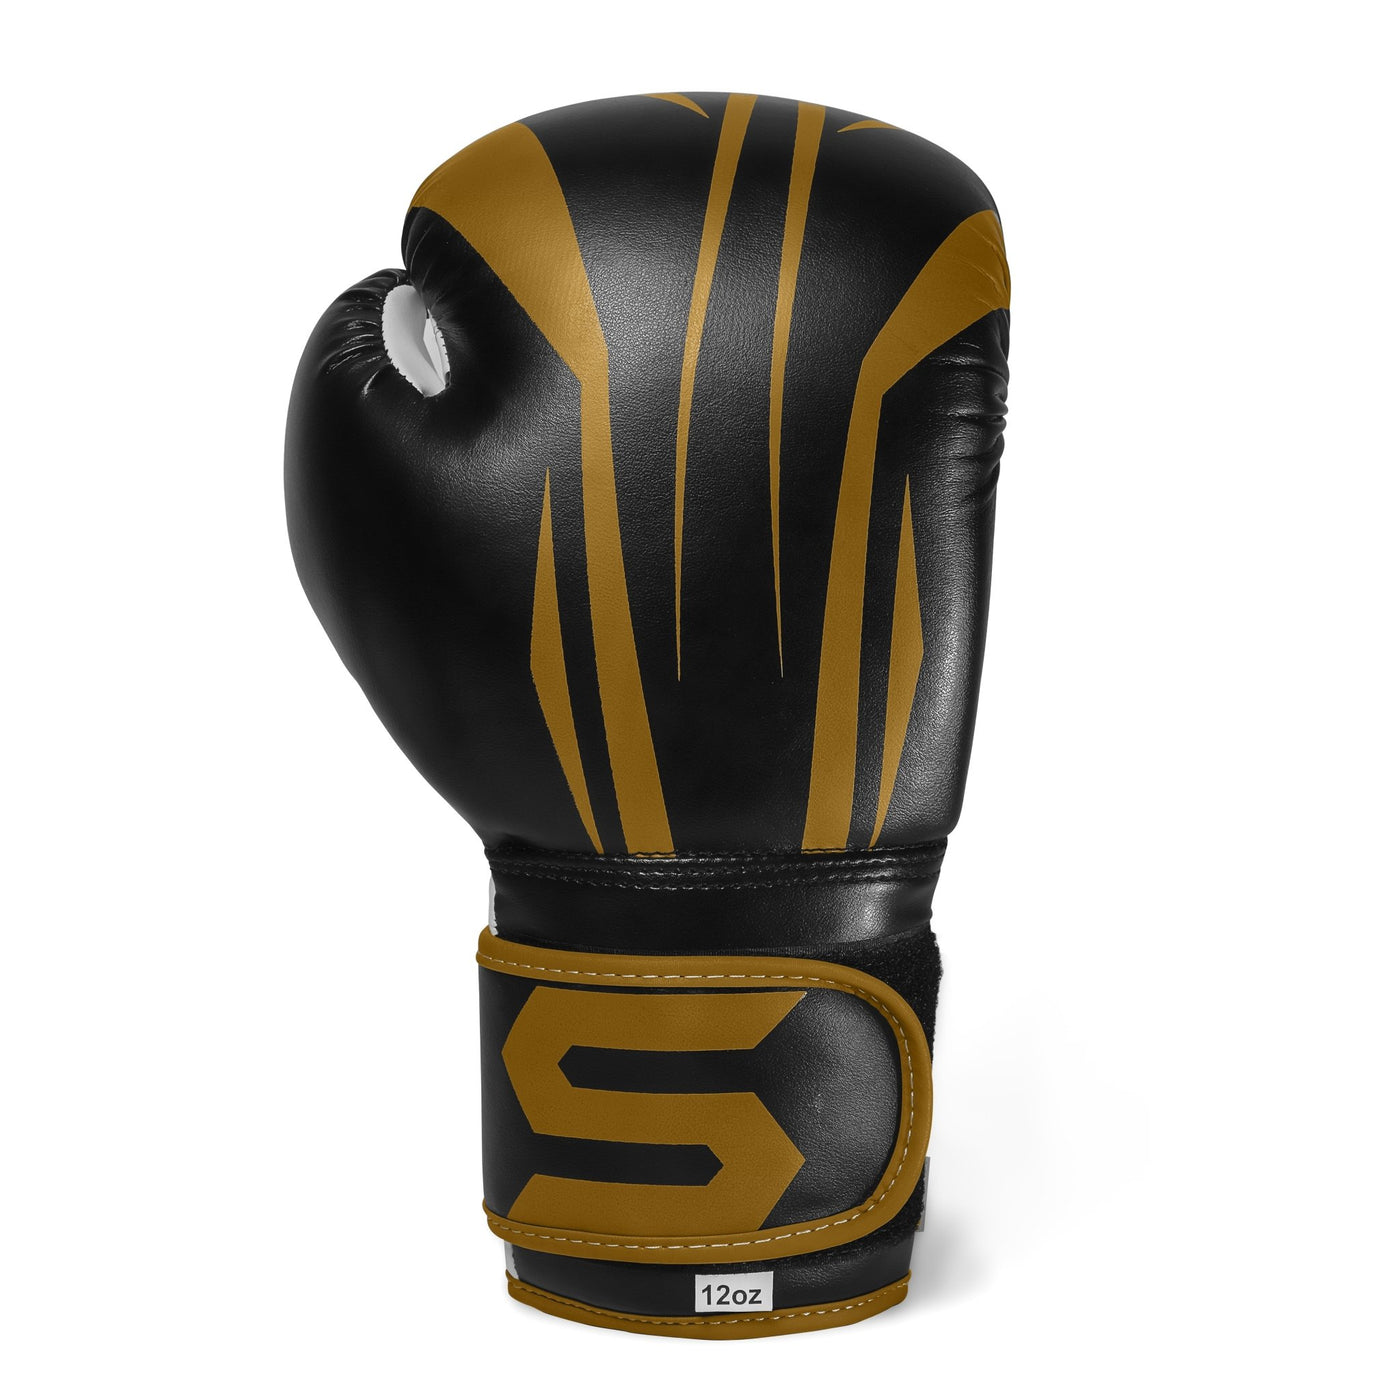 Spinster Gold Leather Boxing Training Gloves - Summo Sports